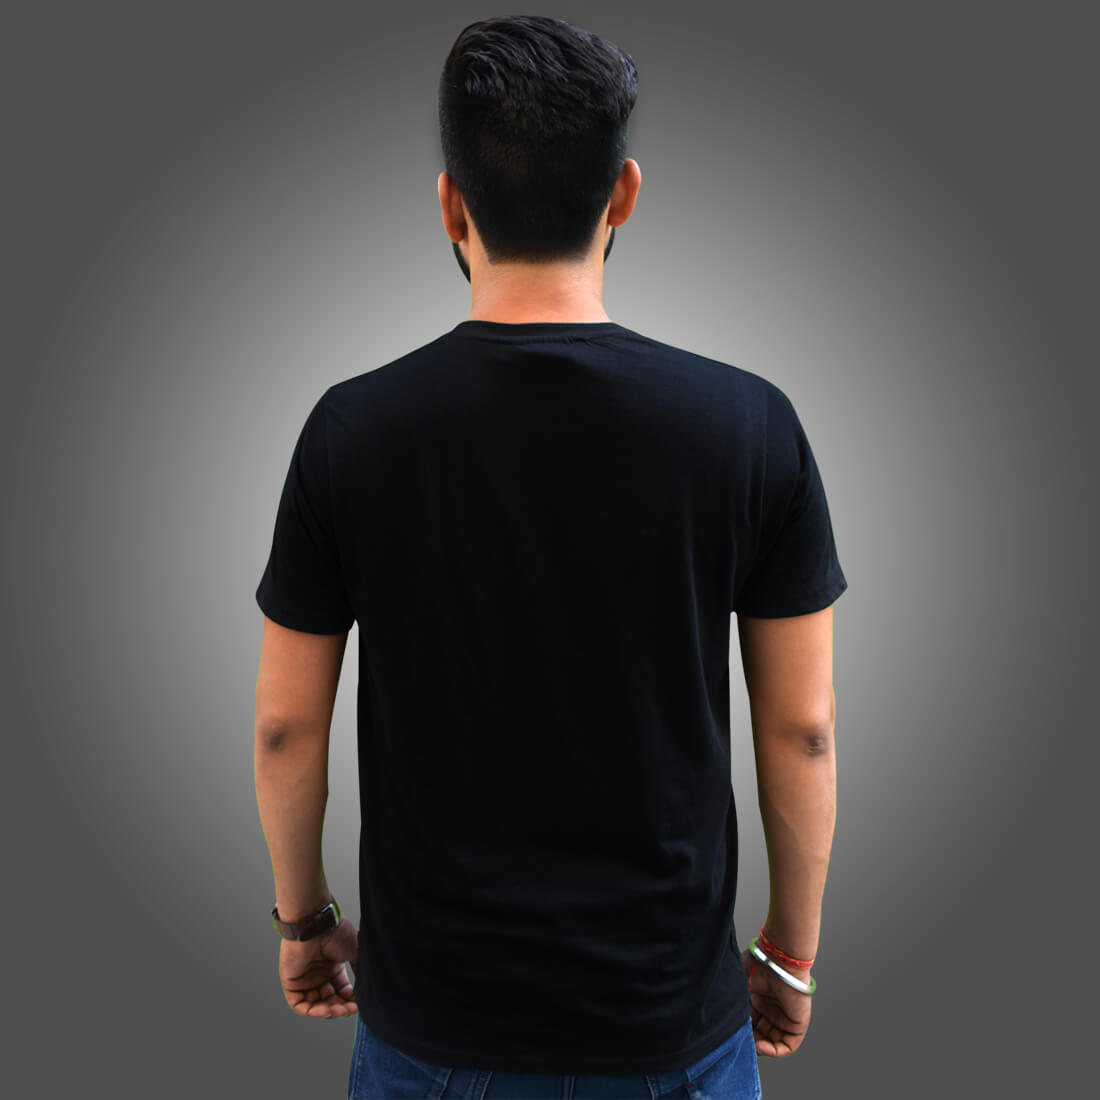 Brahmchari Quotes black T-Shirt Front and Back